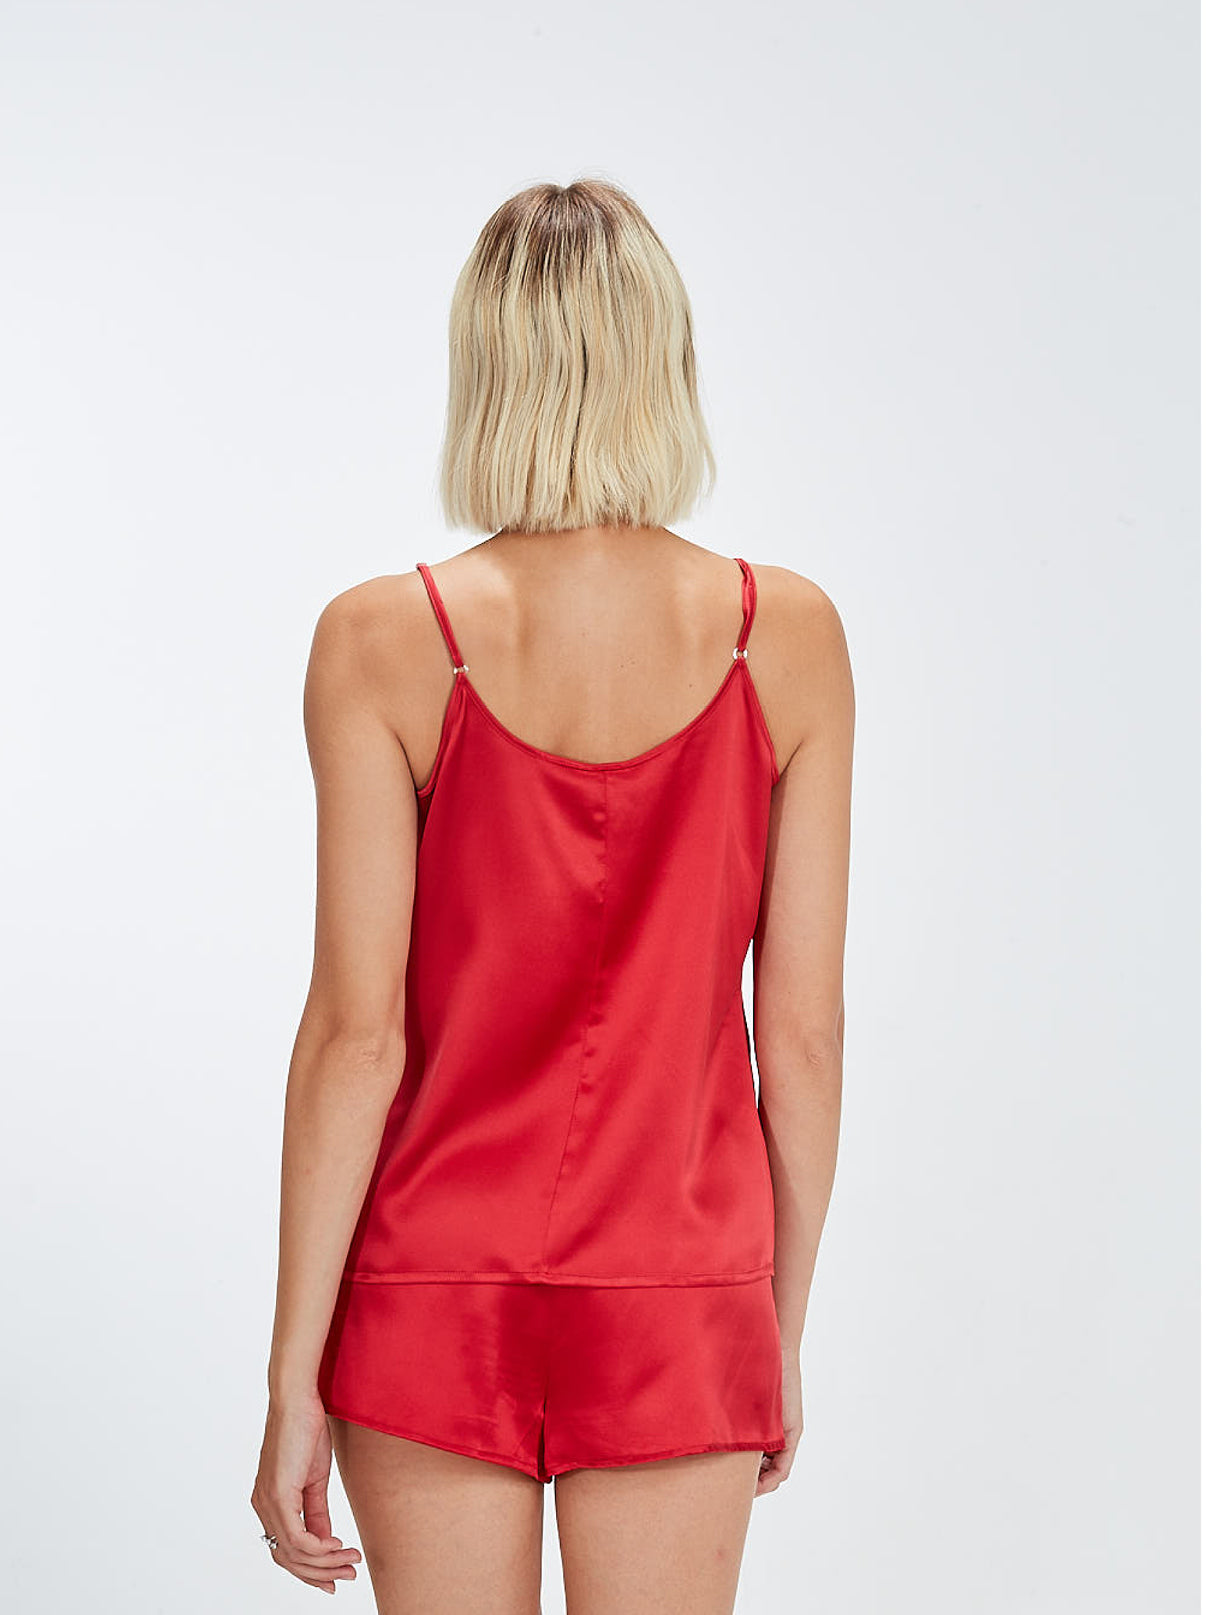 Back Woman silk red top